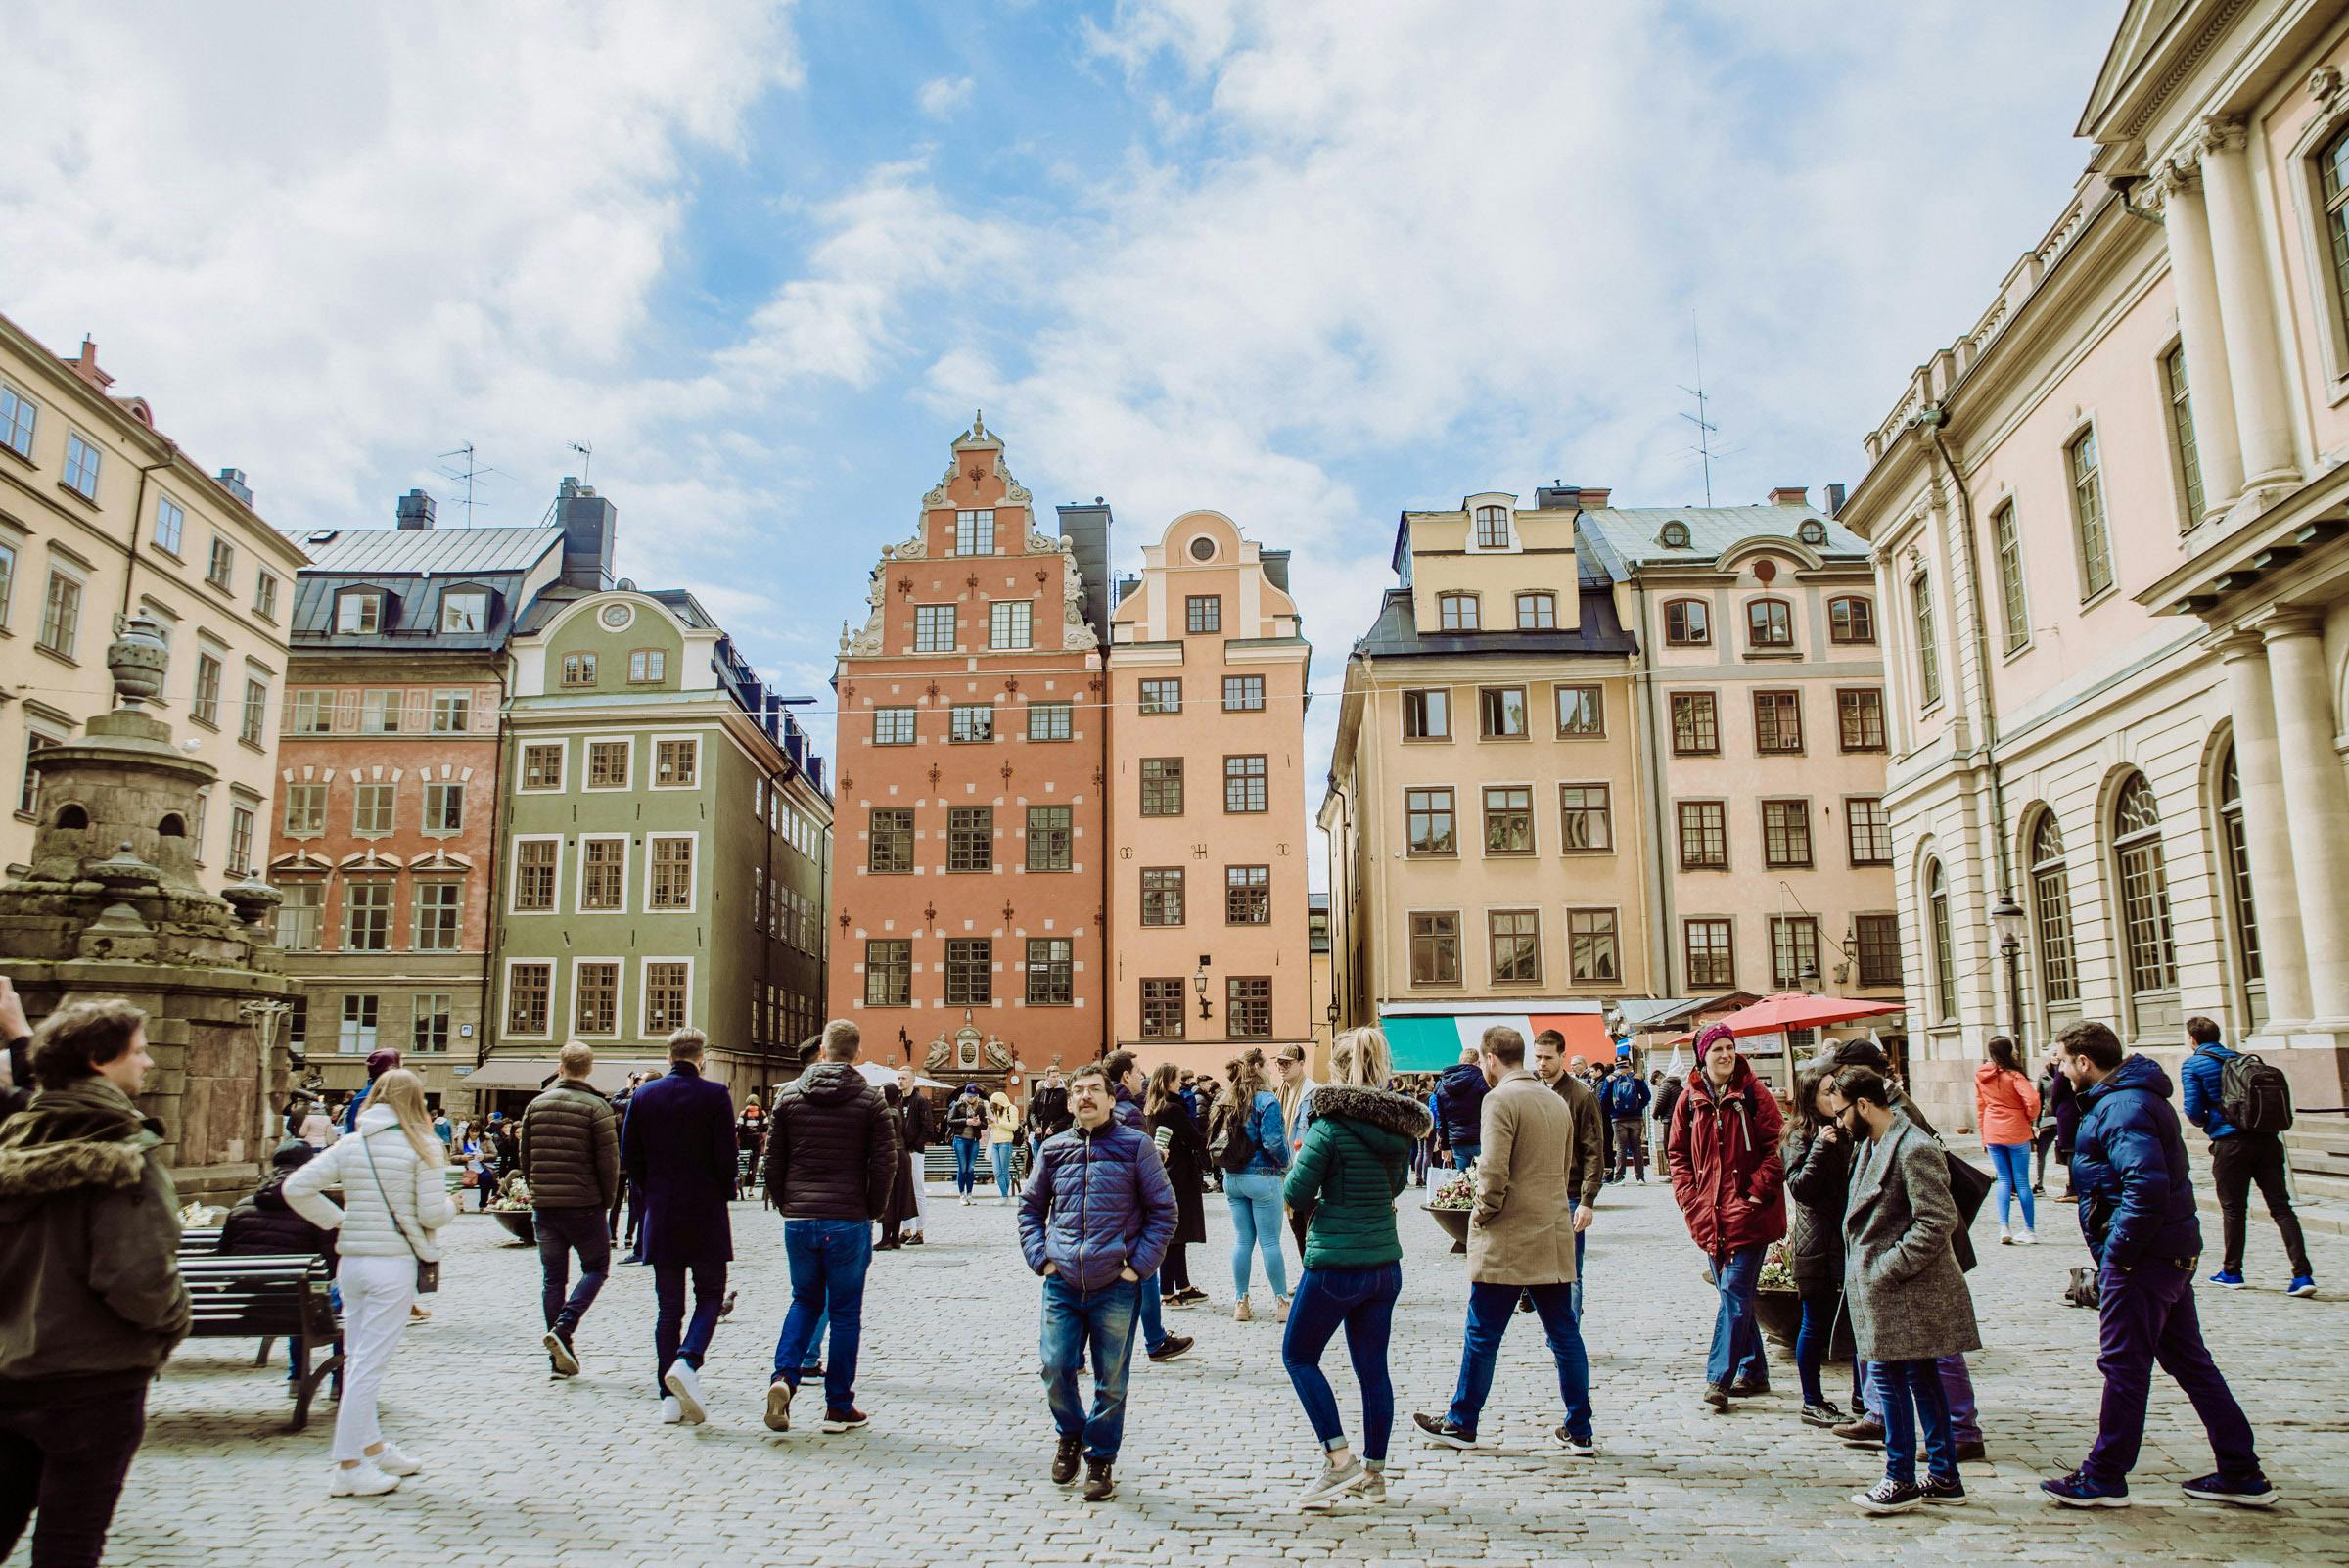 Enjoy a personalized half-day tour in Stockholm with a local